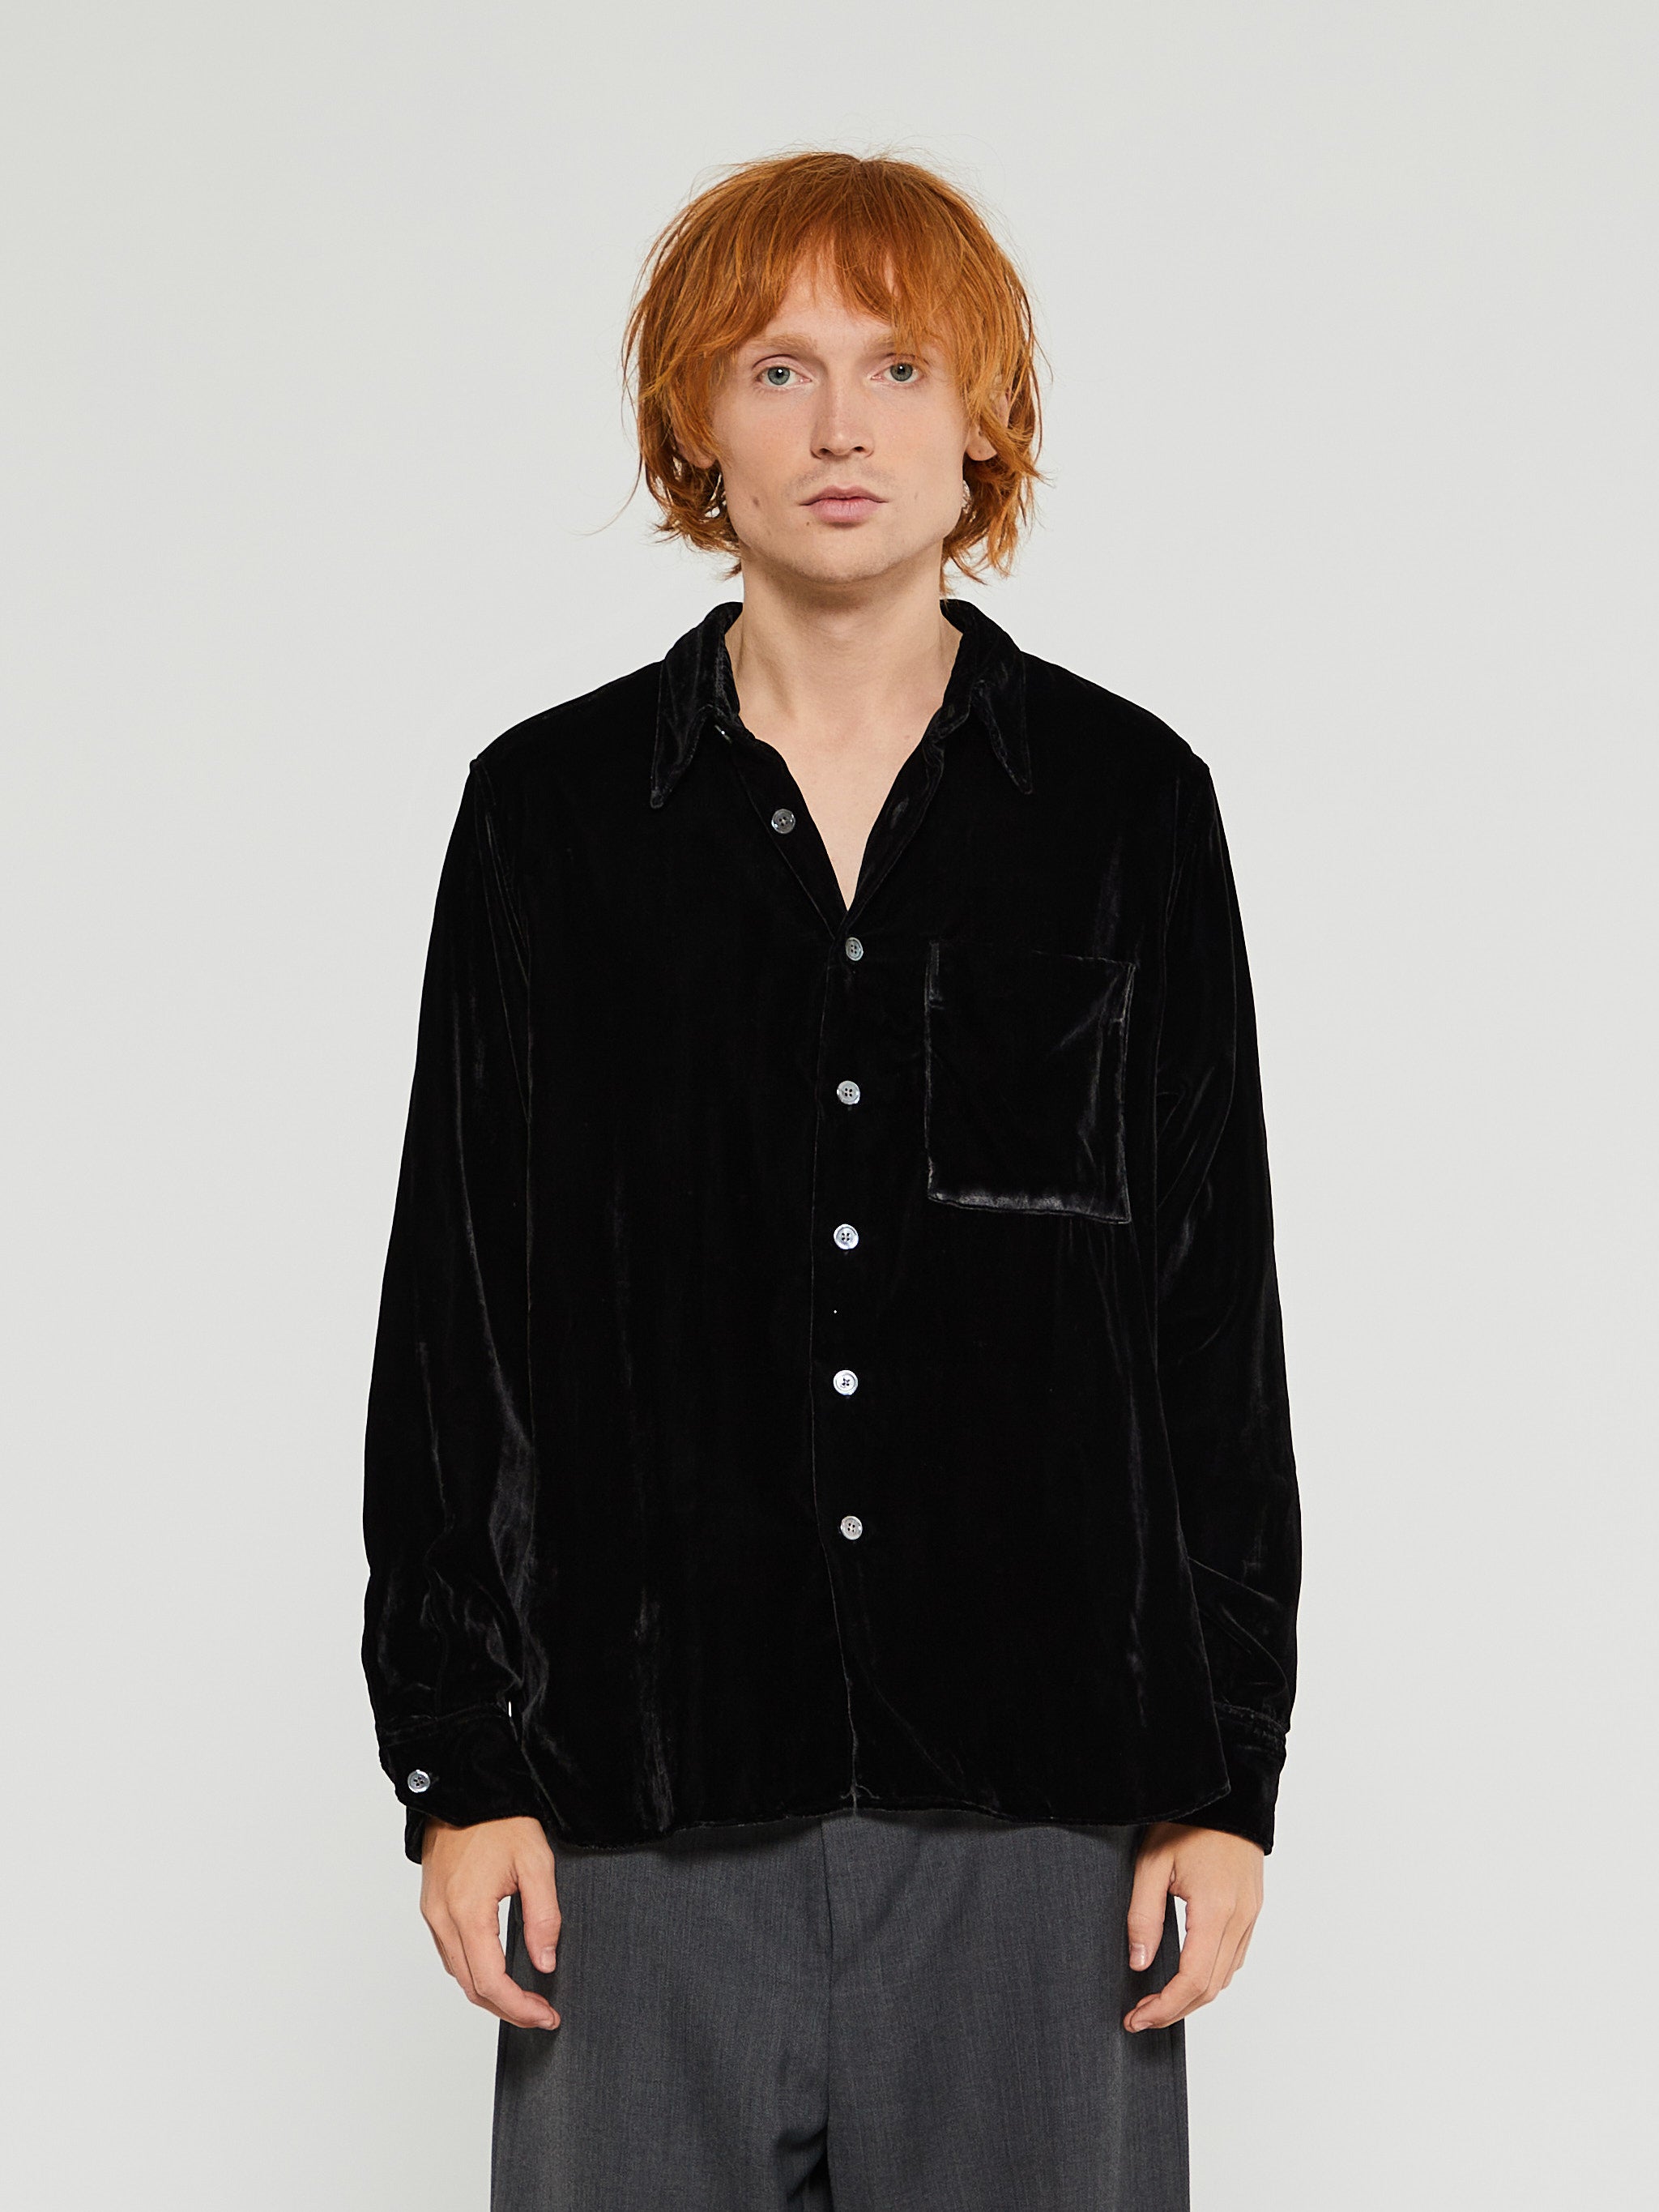 Sunflower - Ace Shirt in Black – stoy